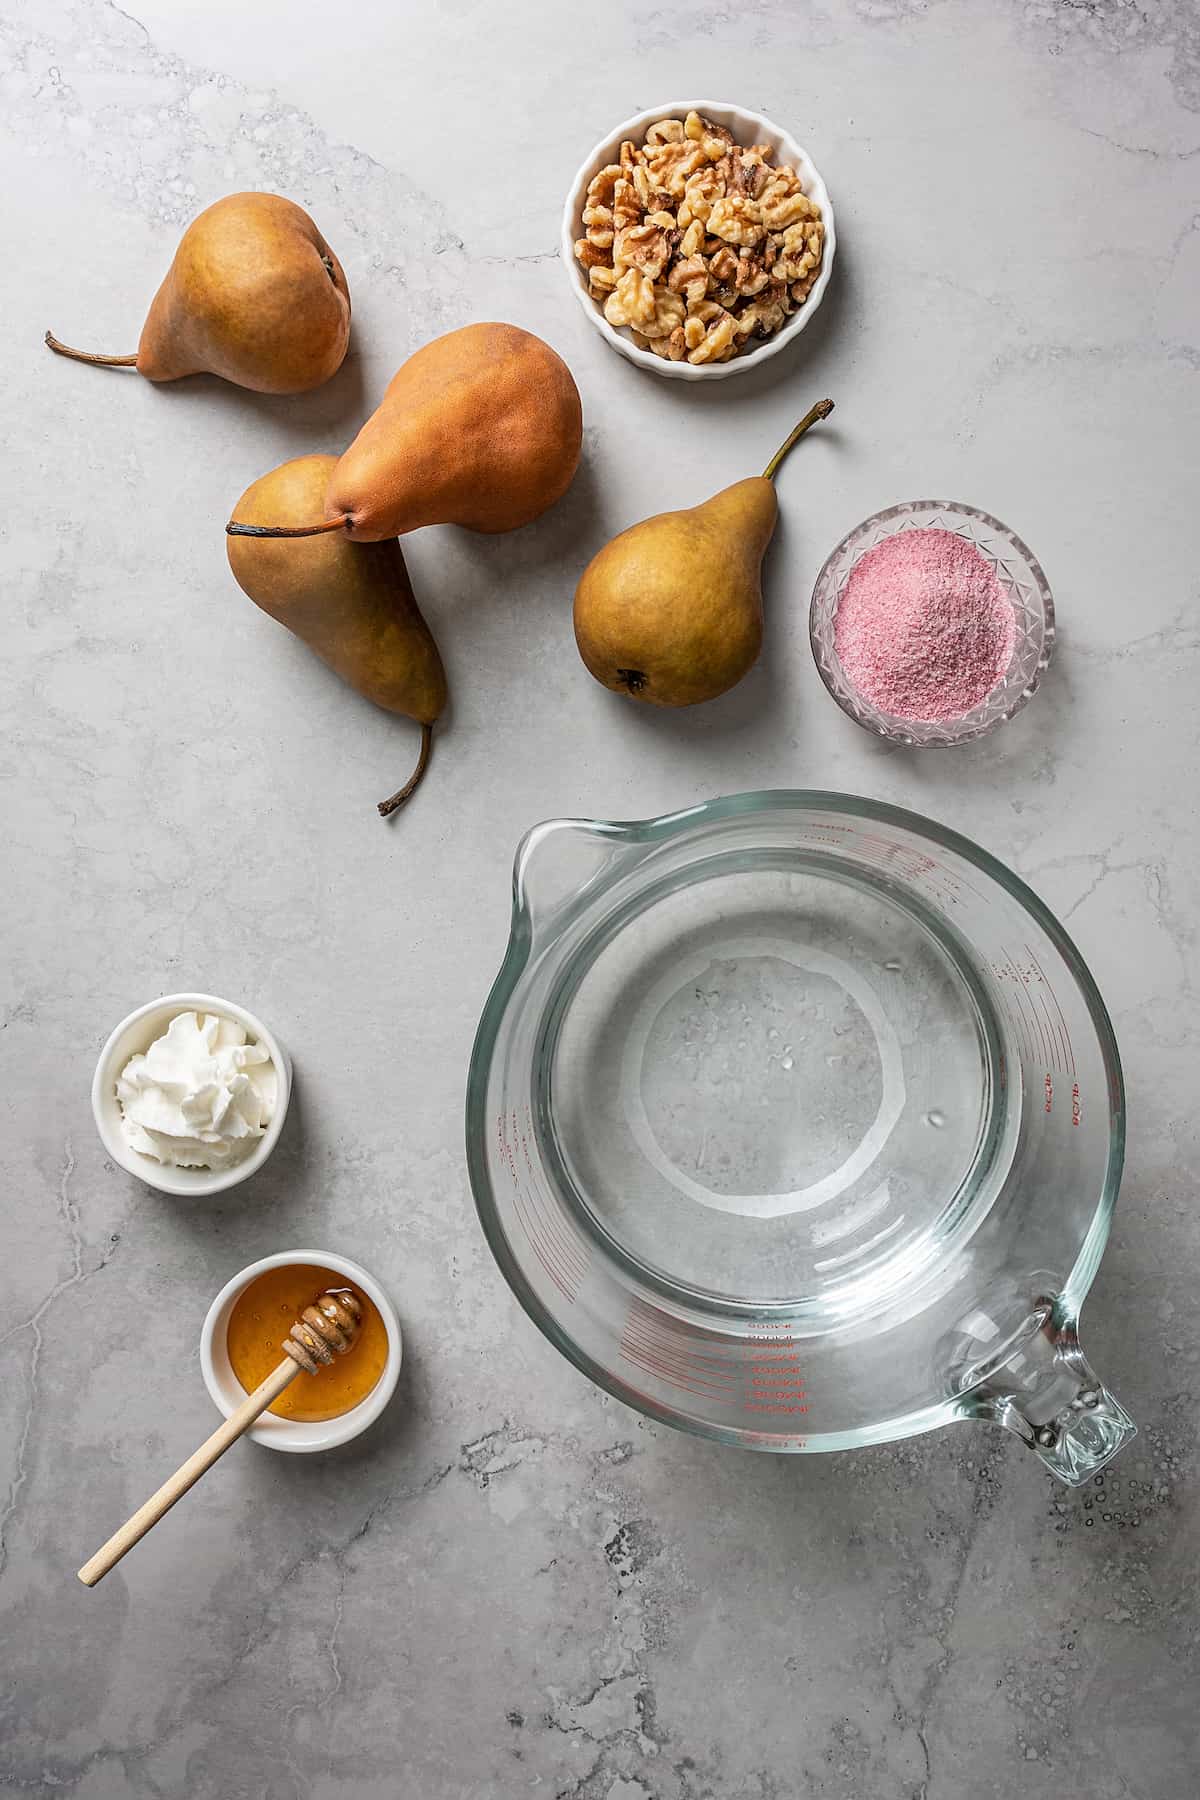 Overhead view of the ingredients needed for poached pears: four whole pears, a bowl of walnuts, a bowl of Jell-O gelatin, a bowl of whipped cream, a bowl of honey with a wooden honey spoon, and a pyrex of water